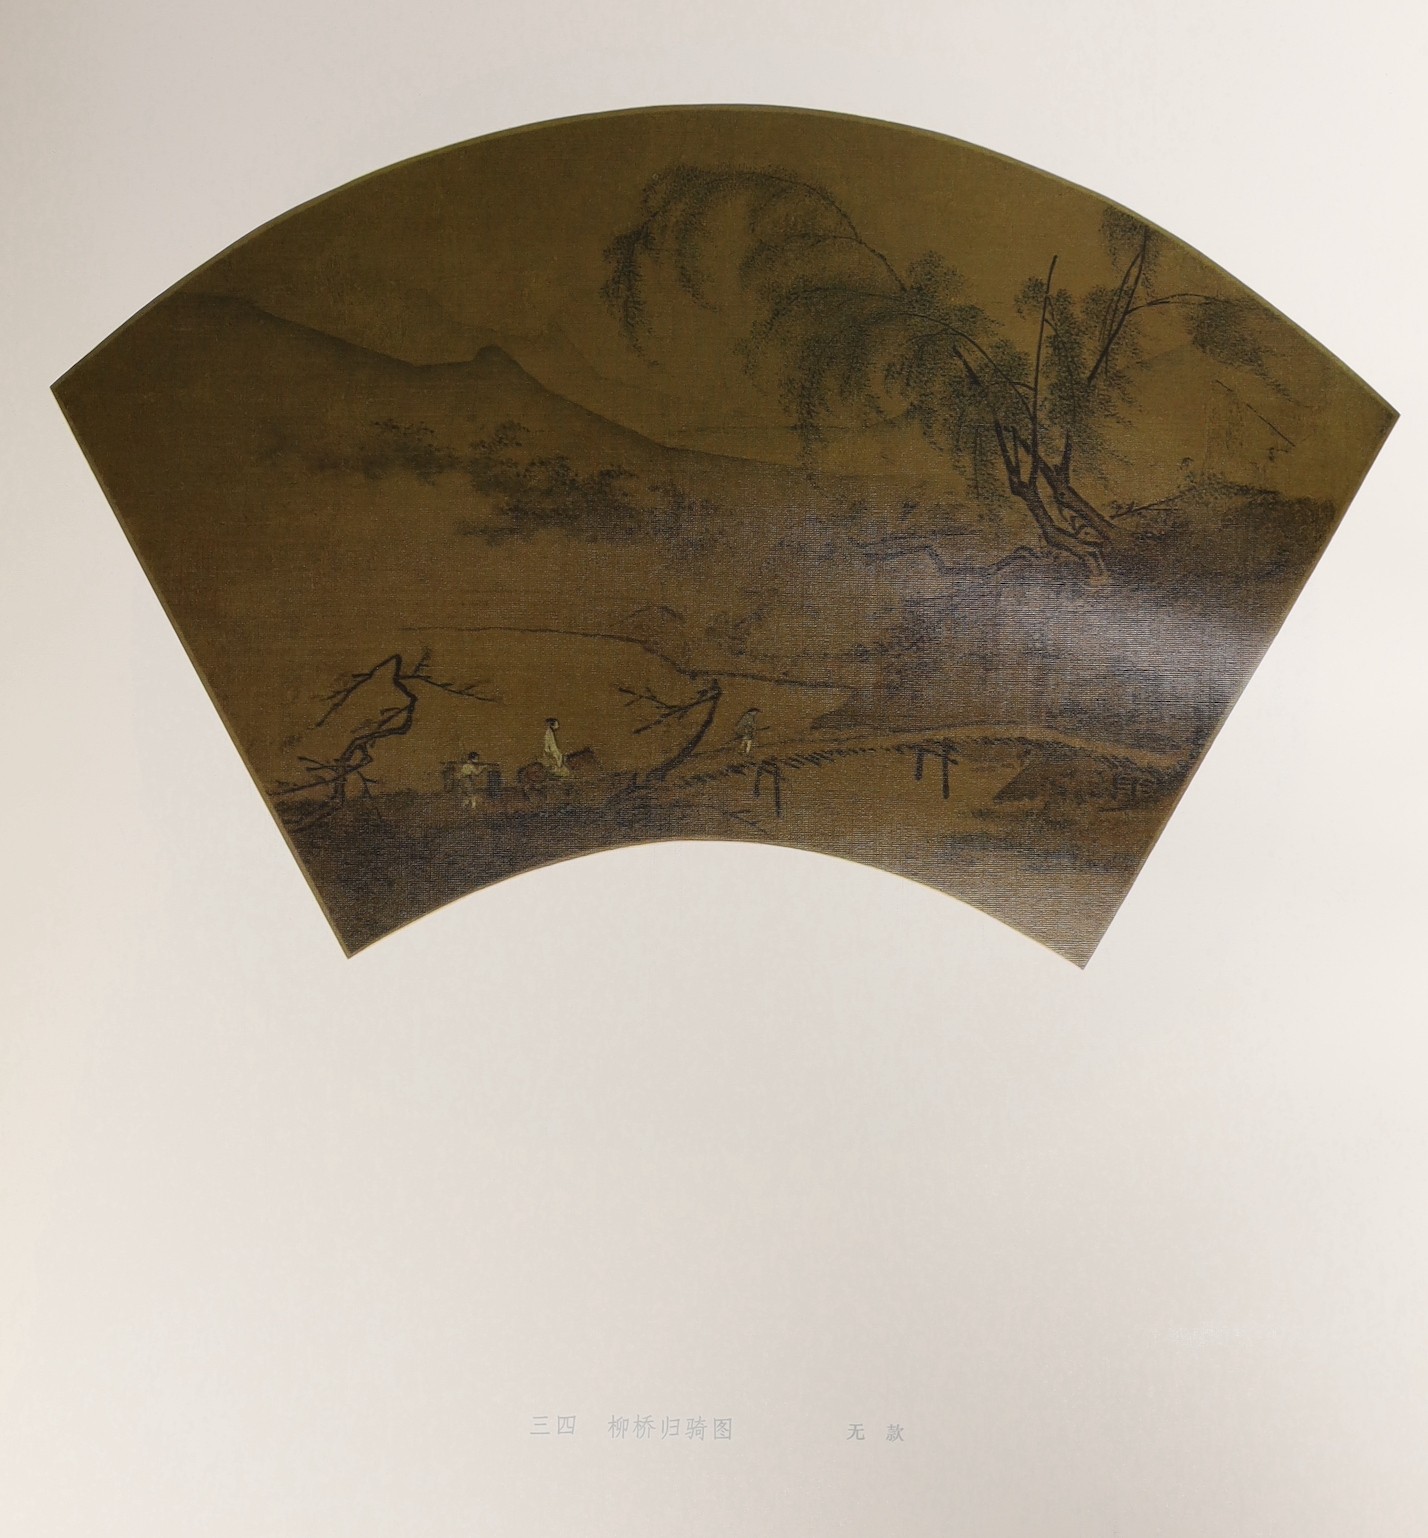 Song Dynasty paintings, published 1978